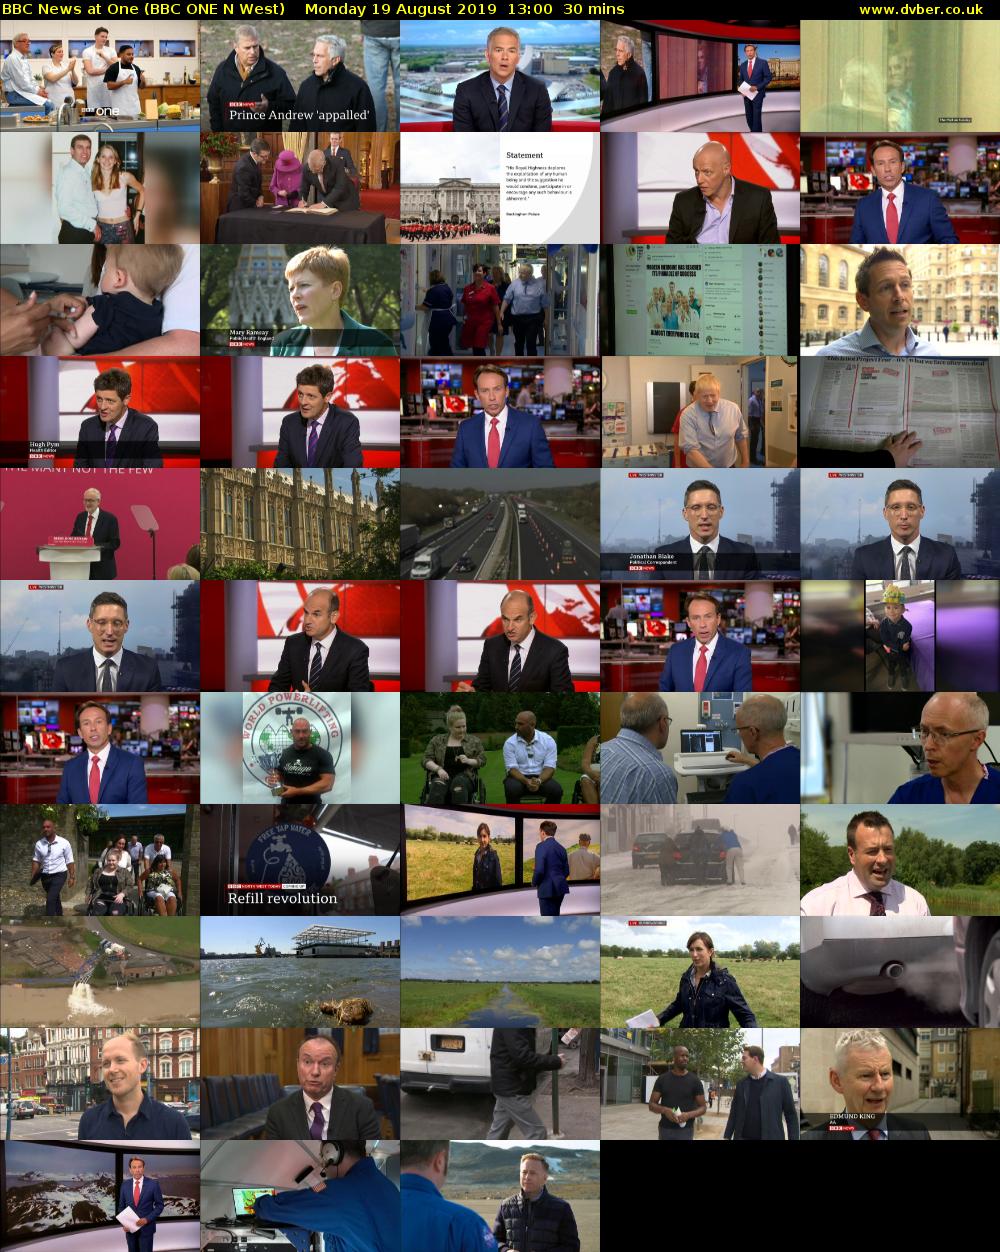 BBC News at One (BBC ONE N West) Monday 19 August 2019 13:00 - 13:30